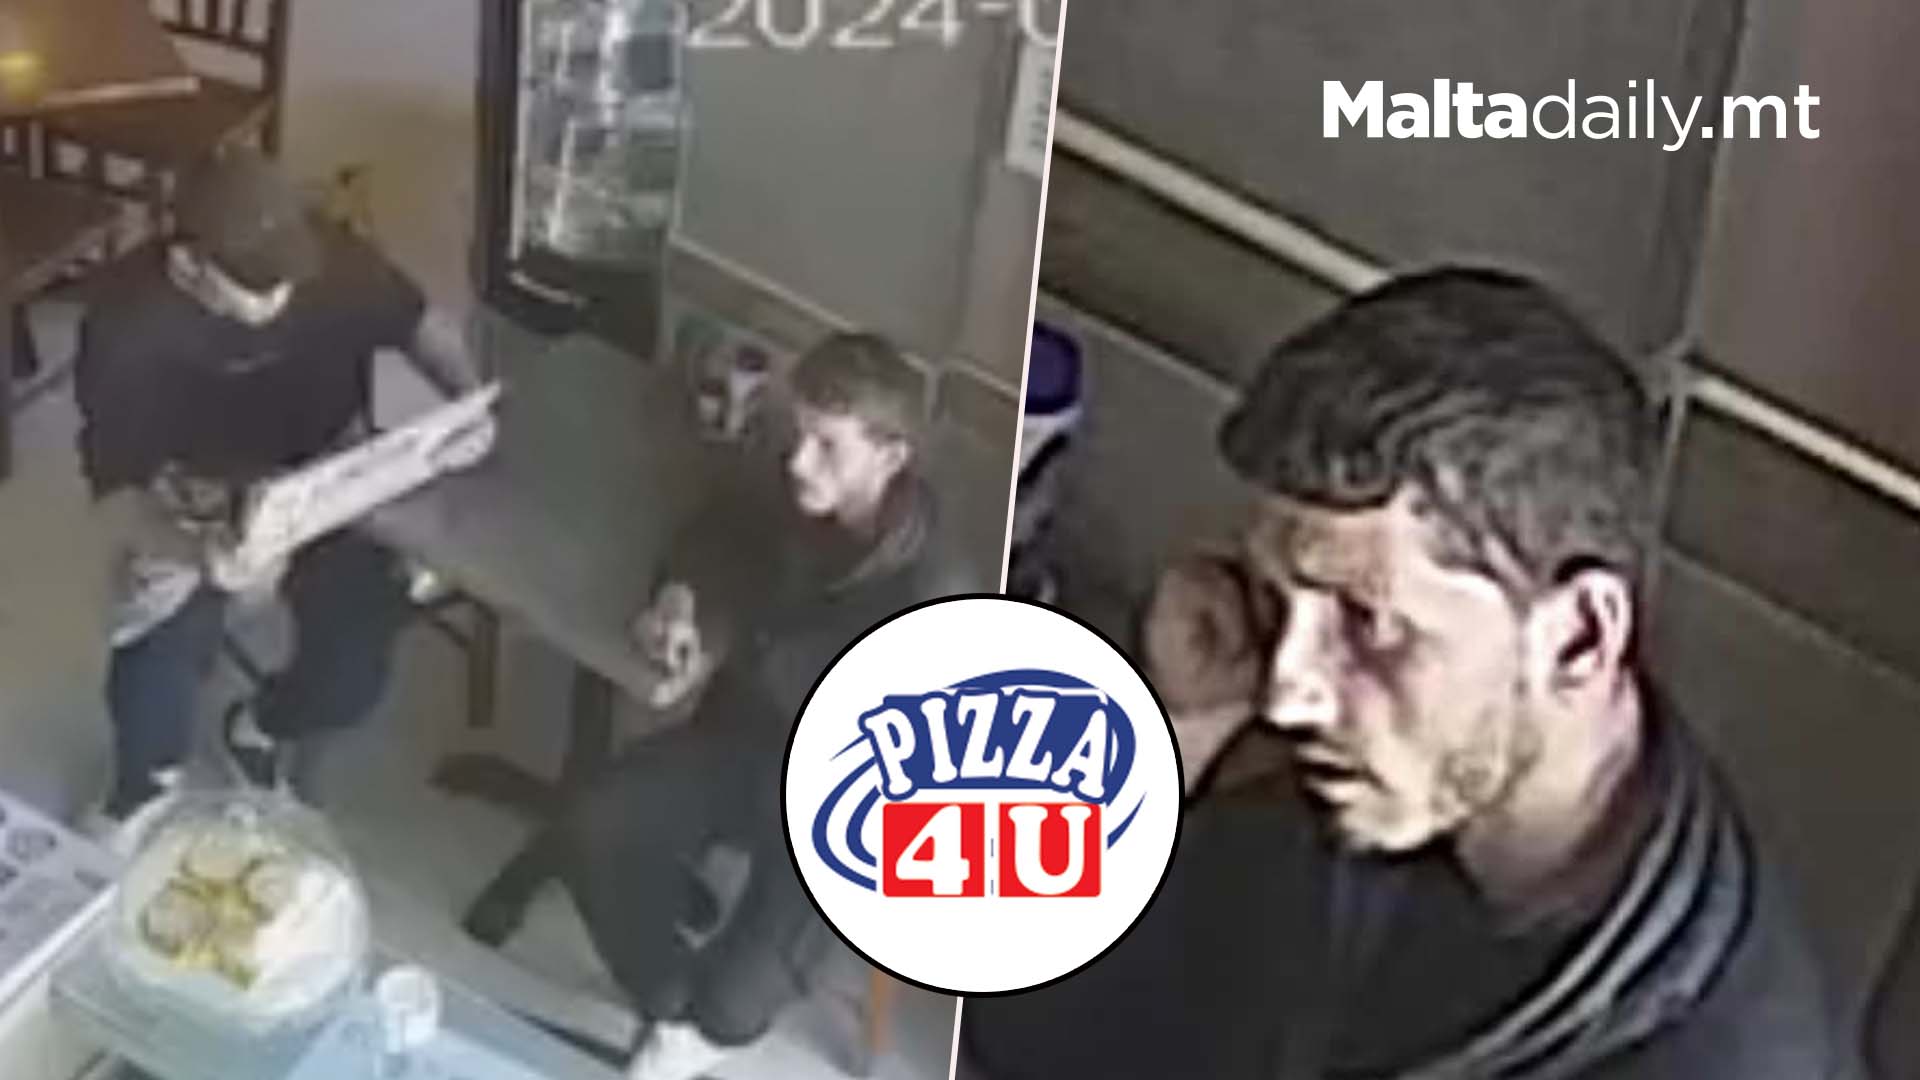 Two Men Caught Stealing From Pizza 4U On CCTV